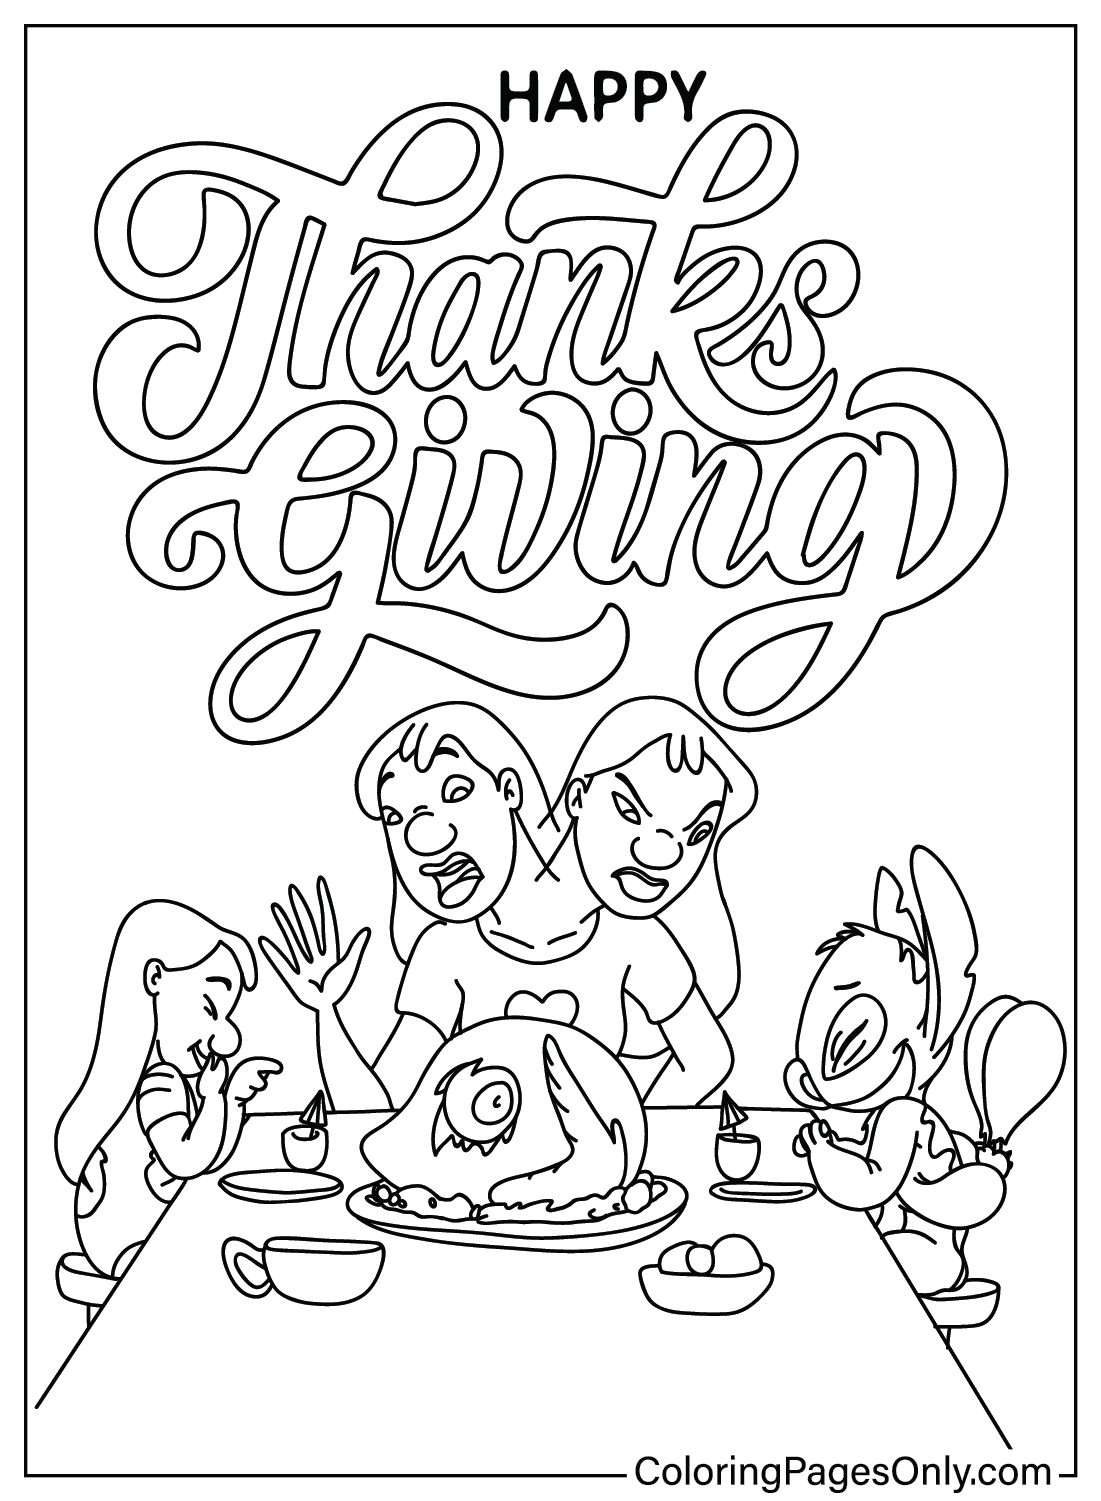 Lilo & Stitch Thanksgiving Coloring Page